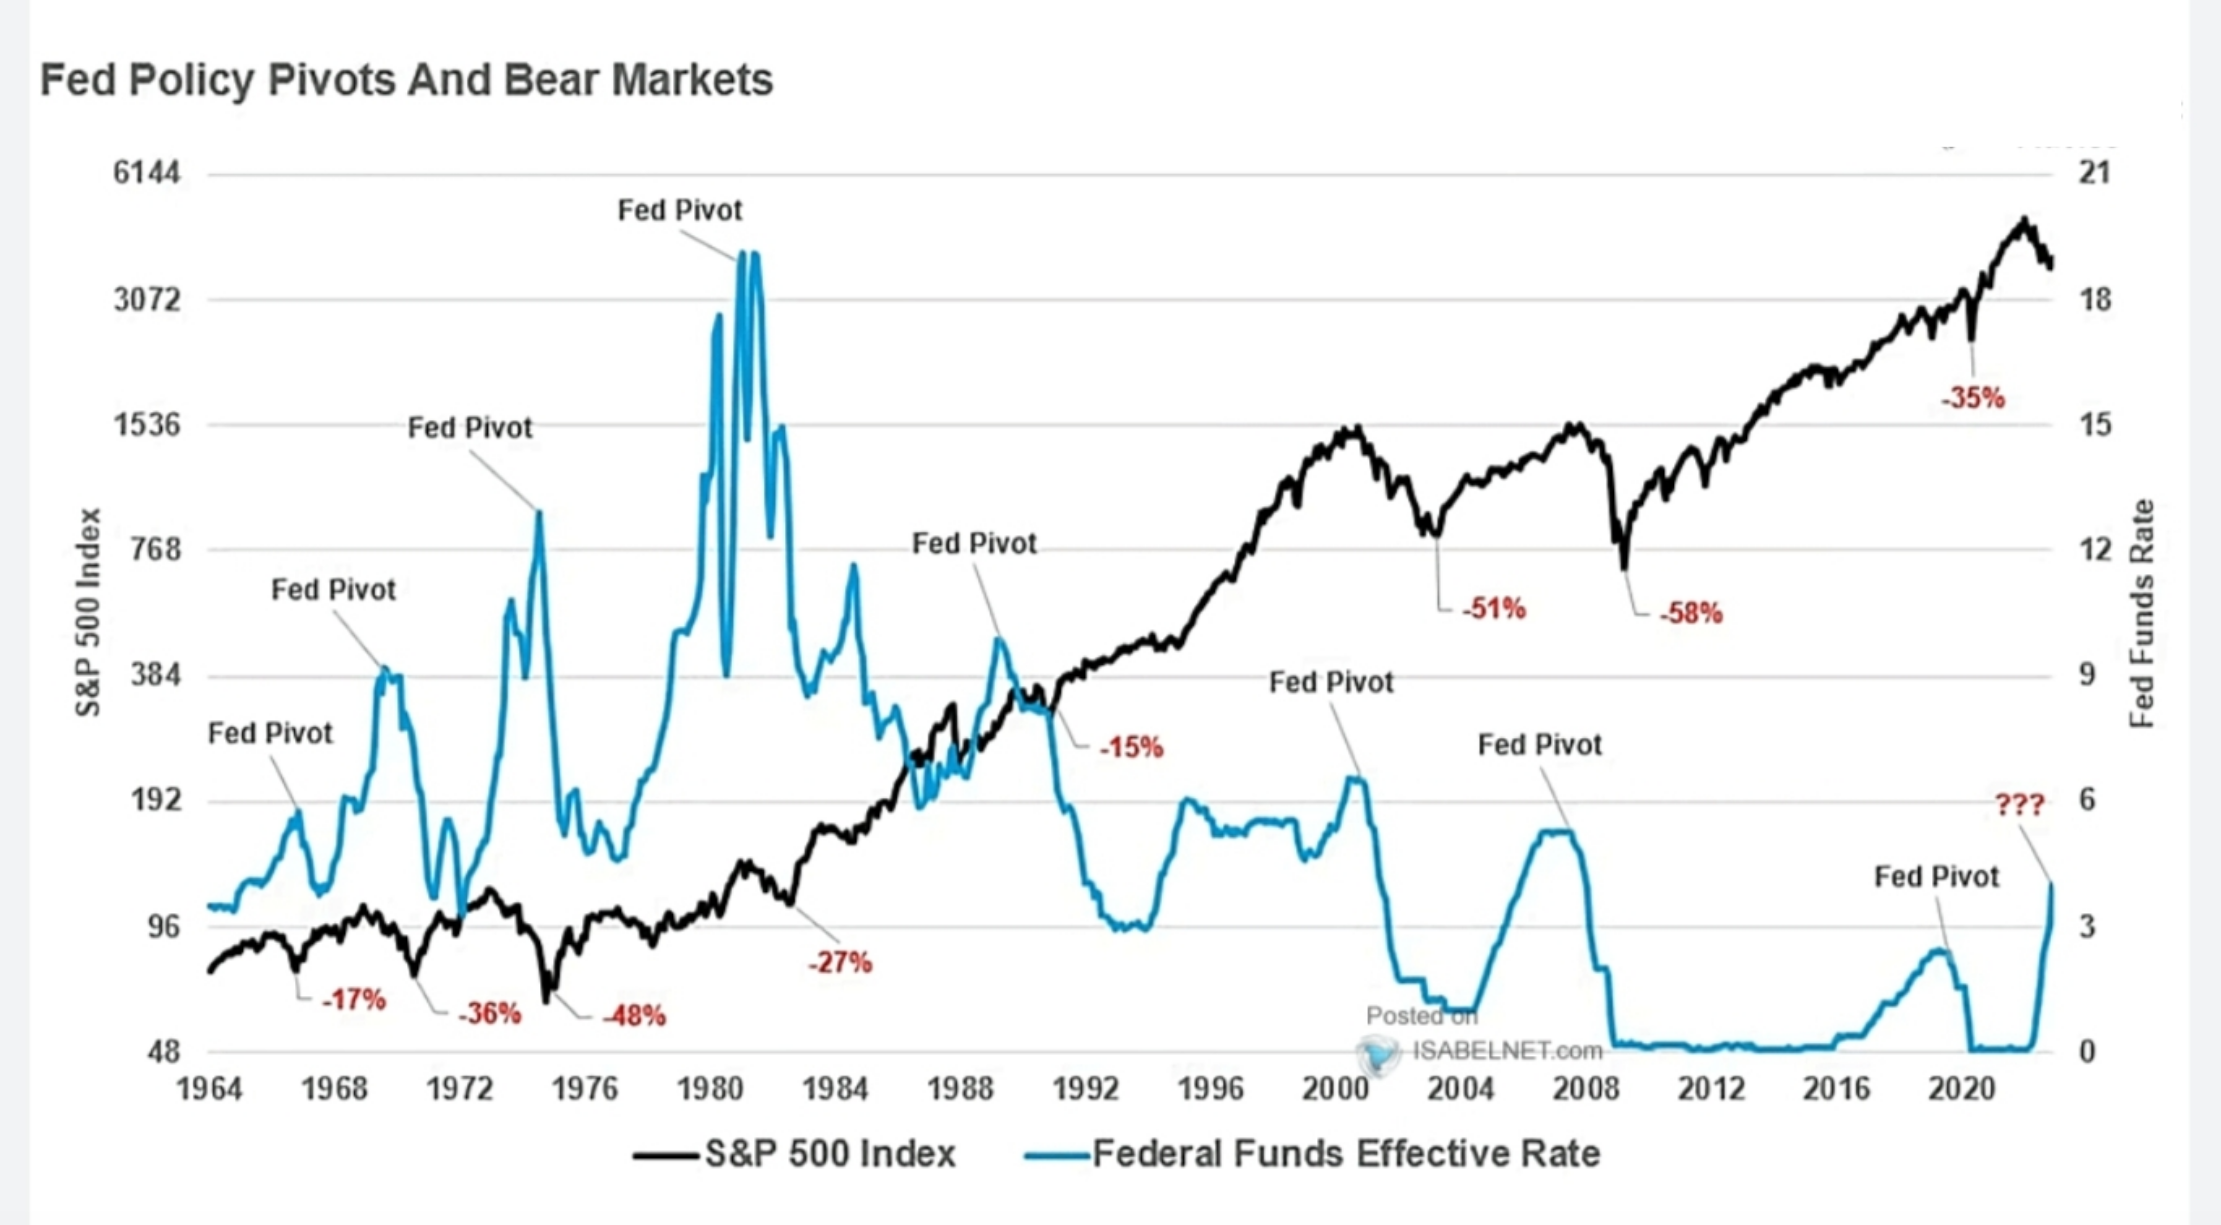 FED FUNDS RATE vs SNP500